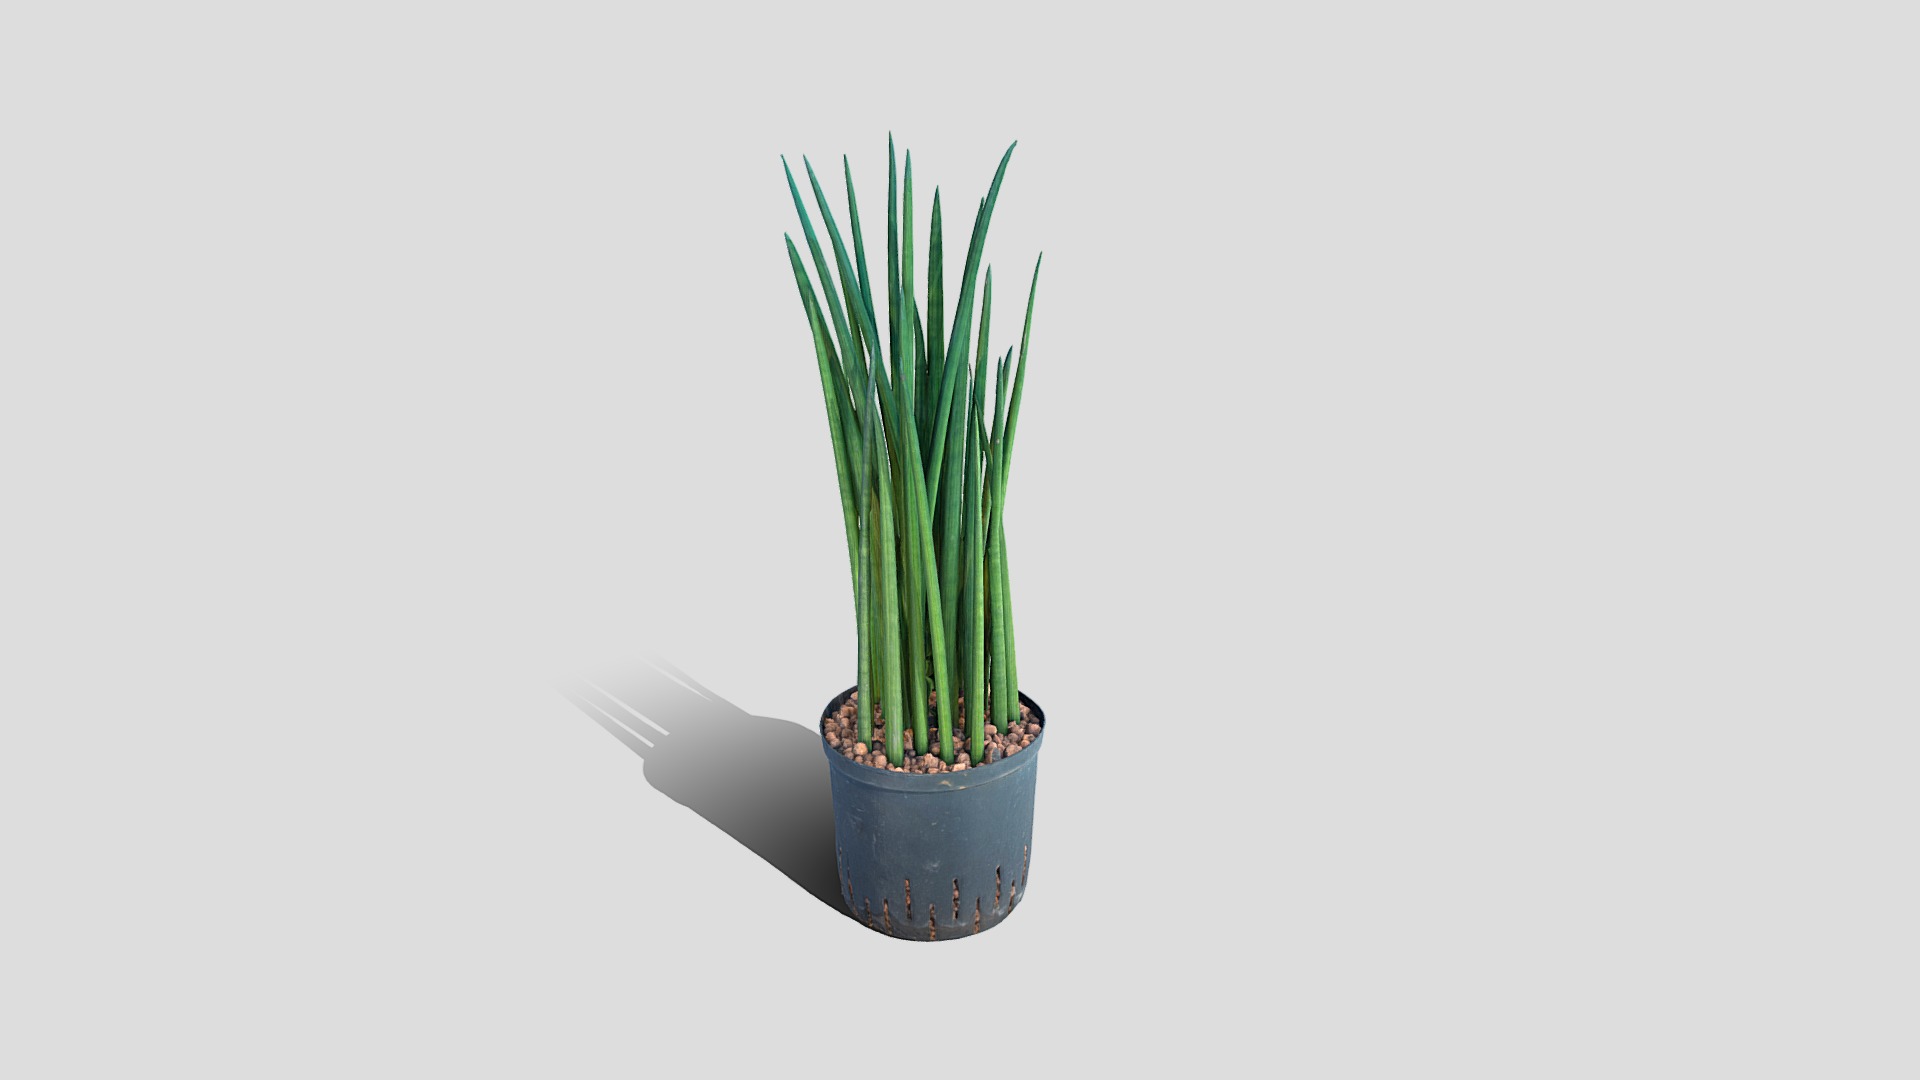 3D model 000027_Sansevieria Spikes - This is a 3D model of the 000027_Sansevieria Spikes. The 3D model is about a potted plant on a white background.